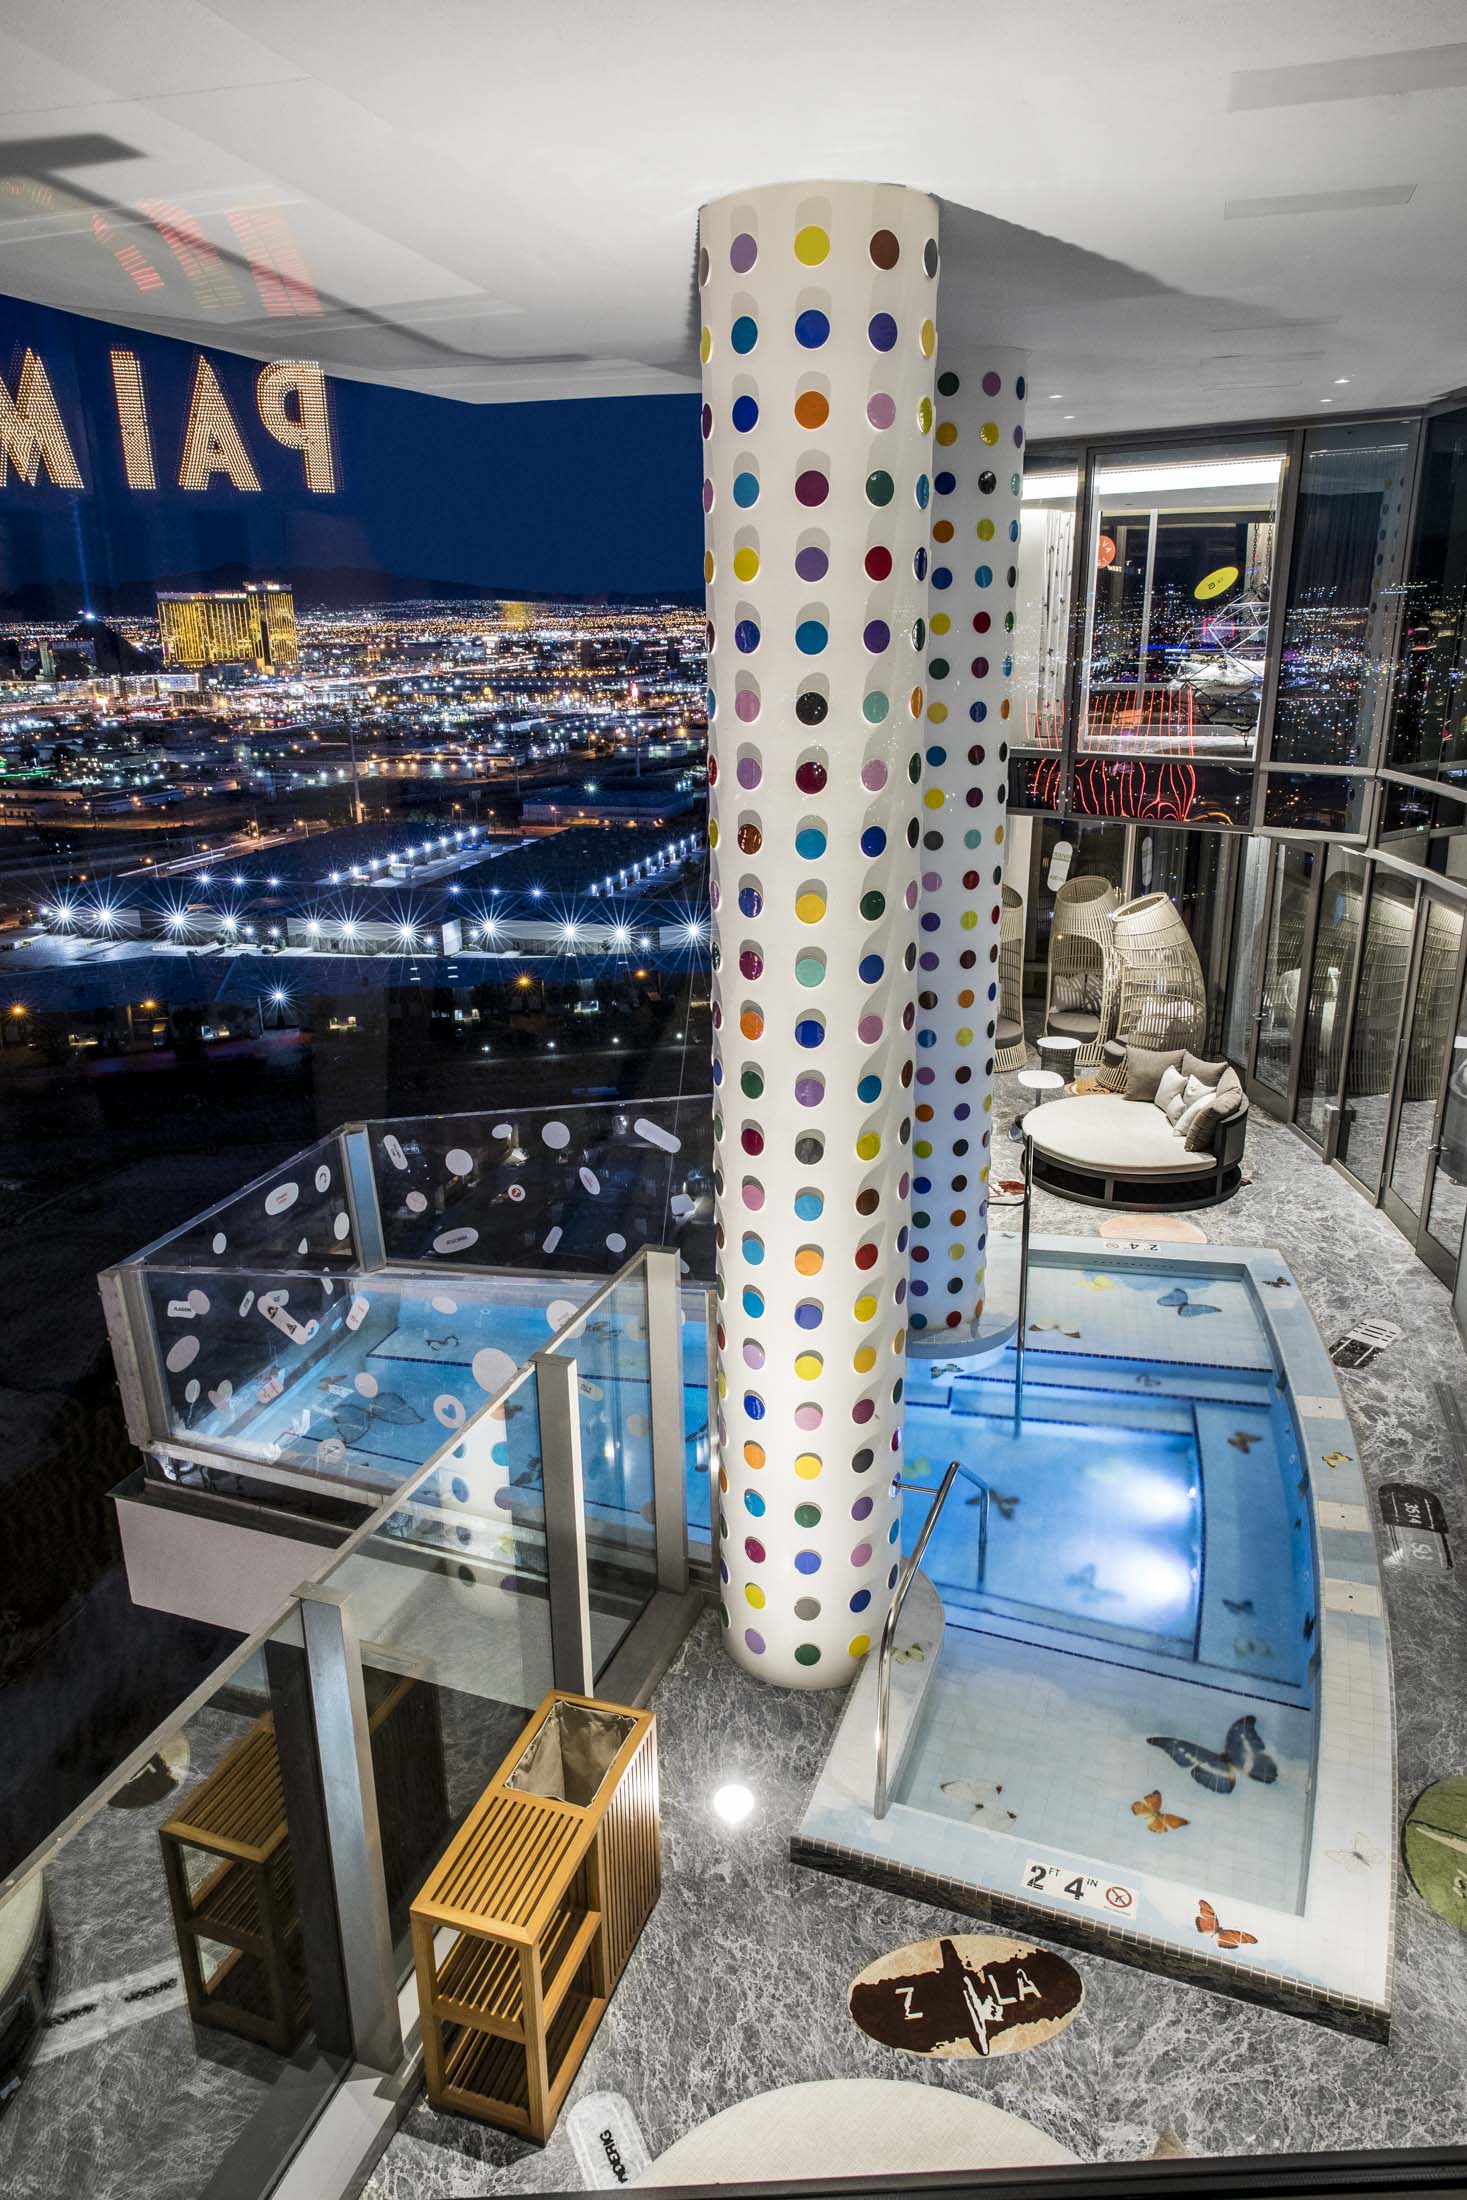 This New Damien Hirst Suite at Palms Casino Resort Costs $100,000